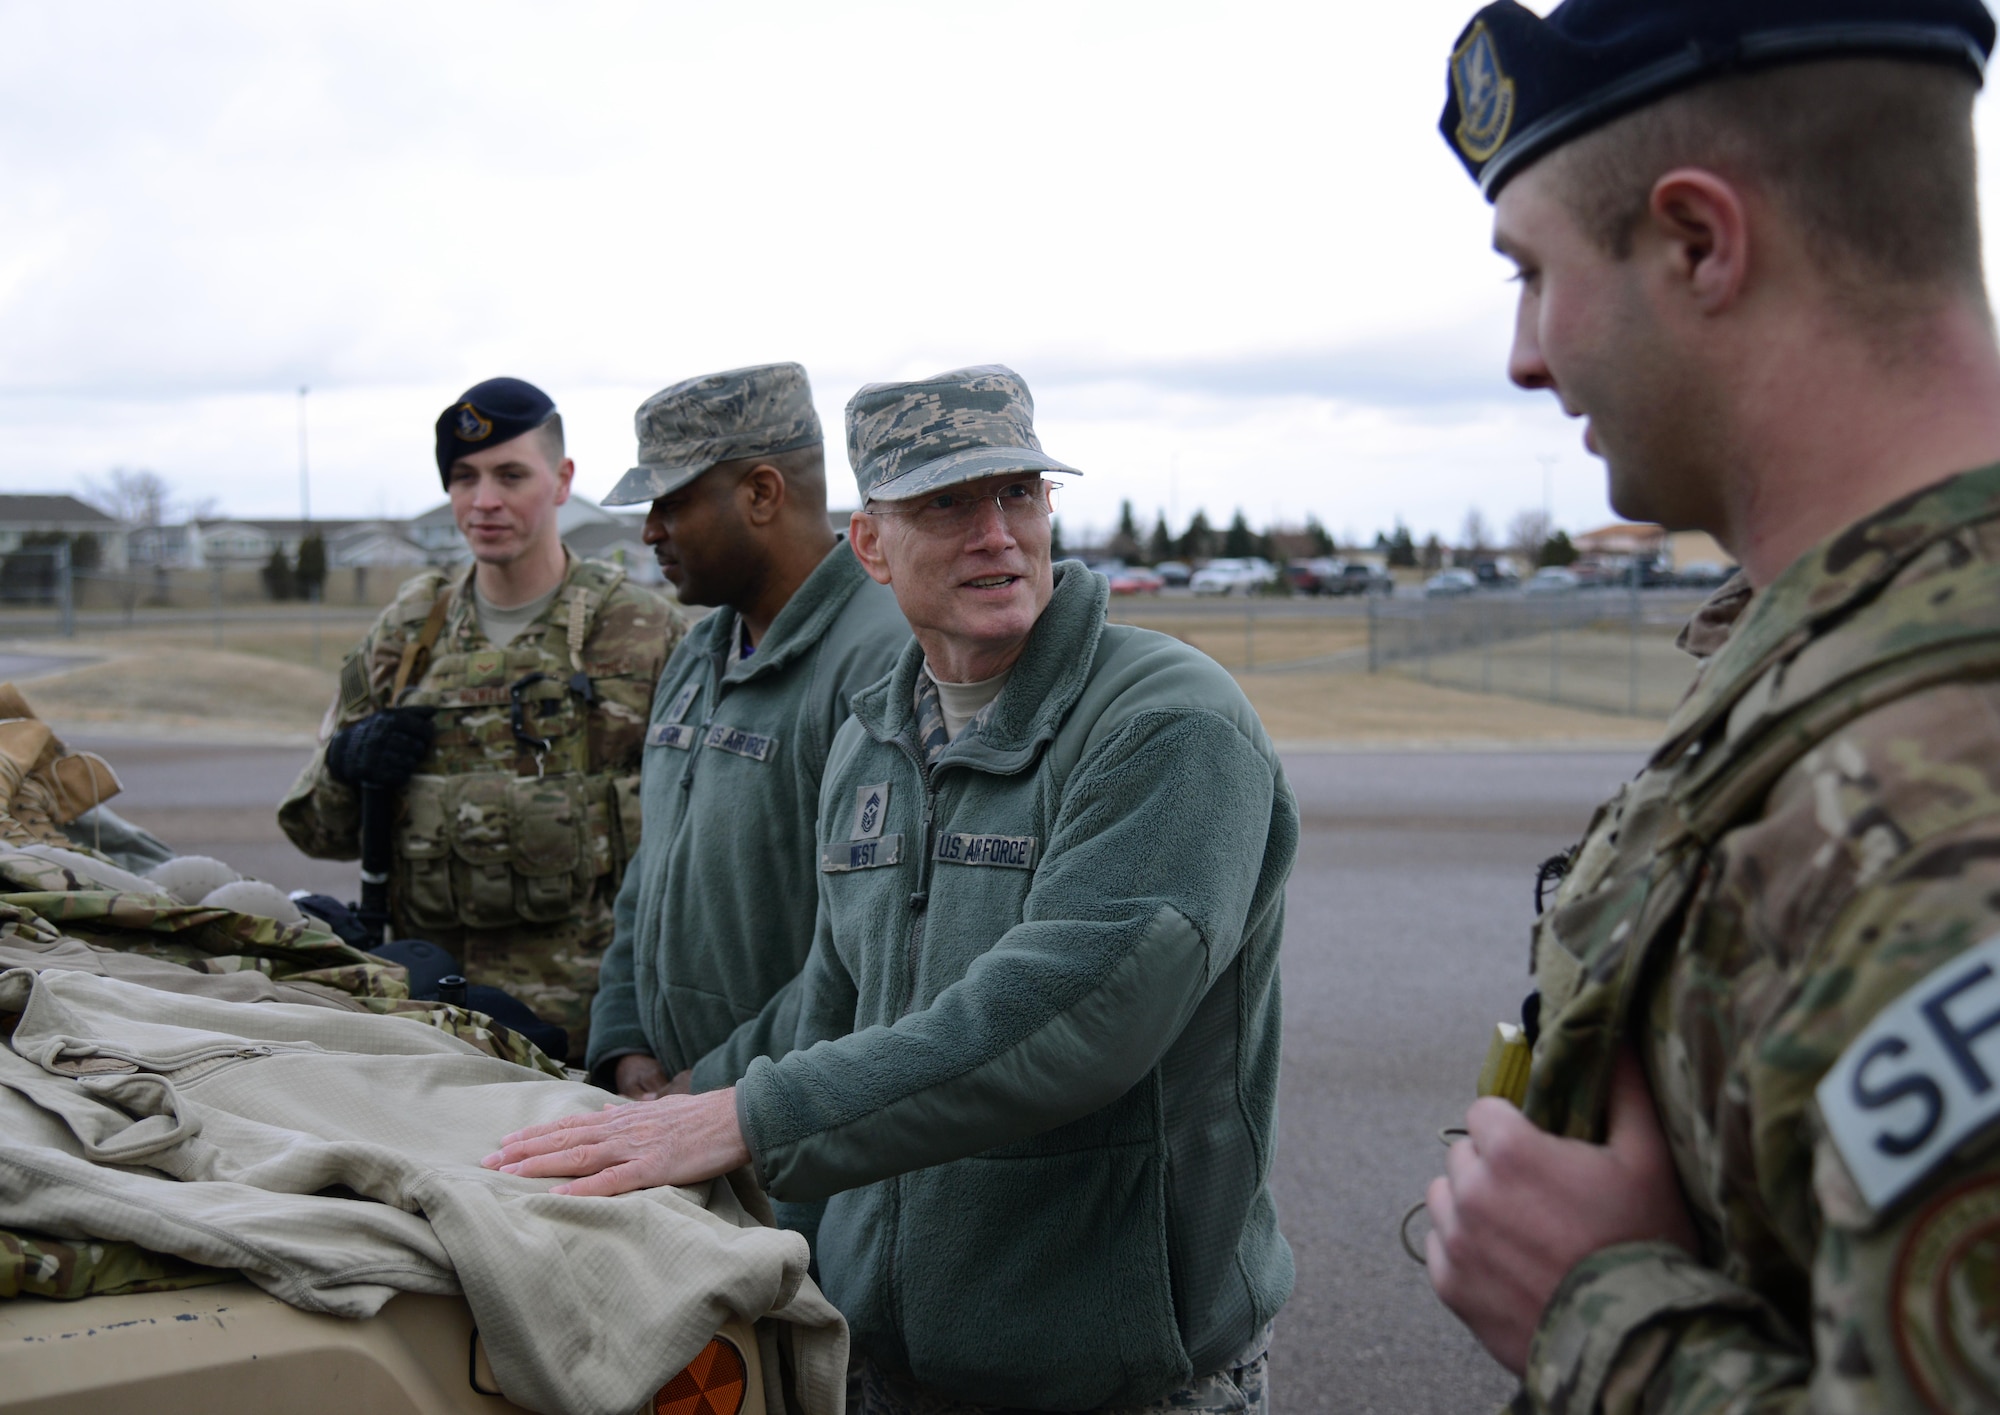 Chief Master Sgt. Terry West, second from right, Air Force Global Strike Command command chief, speaks with security forces Airmen about their new Model Defender equipment Feb. 20 at Malmstrom Air Force Base, Mont. West visited the base to tour its facilities and speak with Team Malmstrom members about the Force Improvement Program. (U.S. Air Force photo/Airman 1st Class Dillon Johnston)